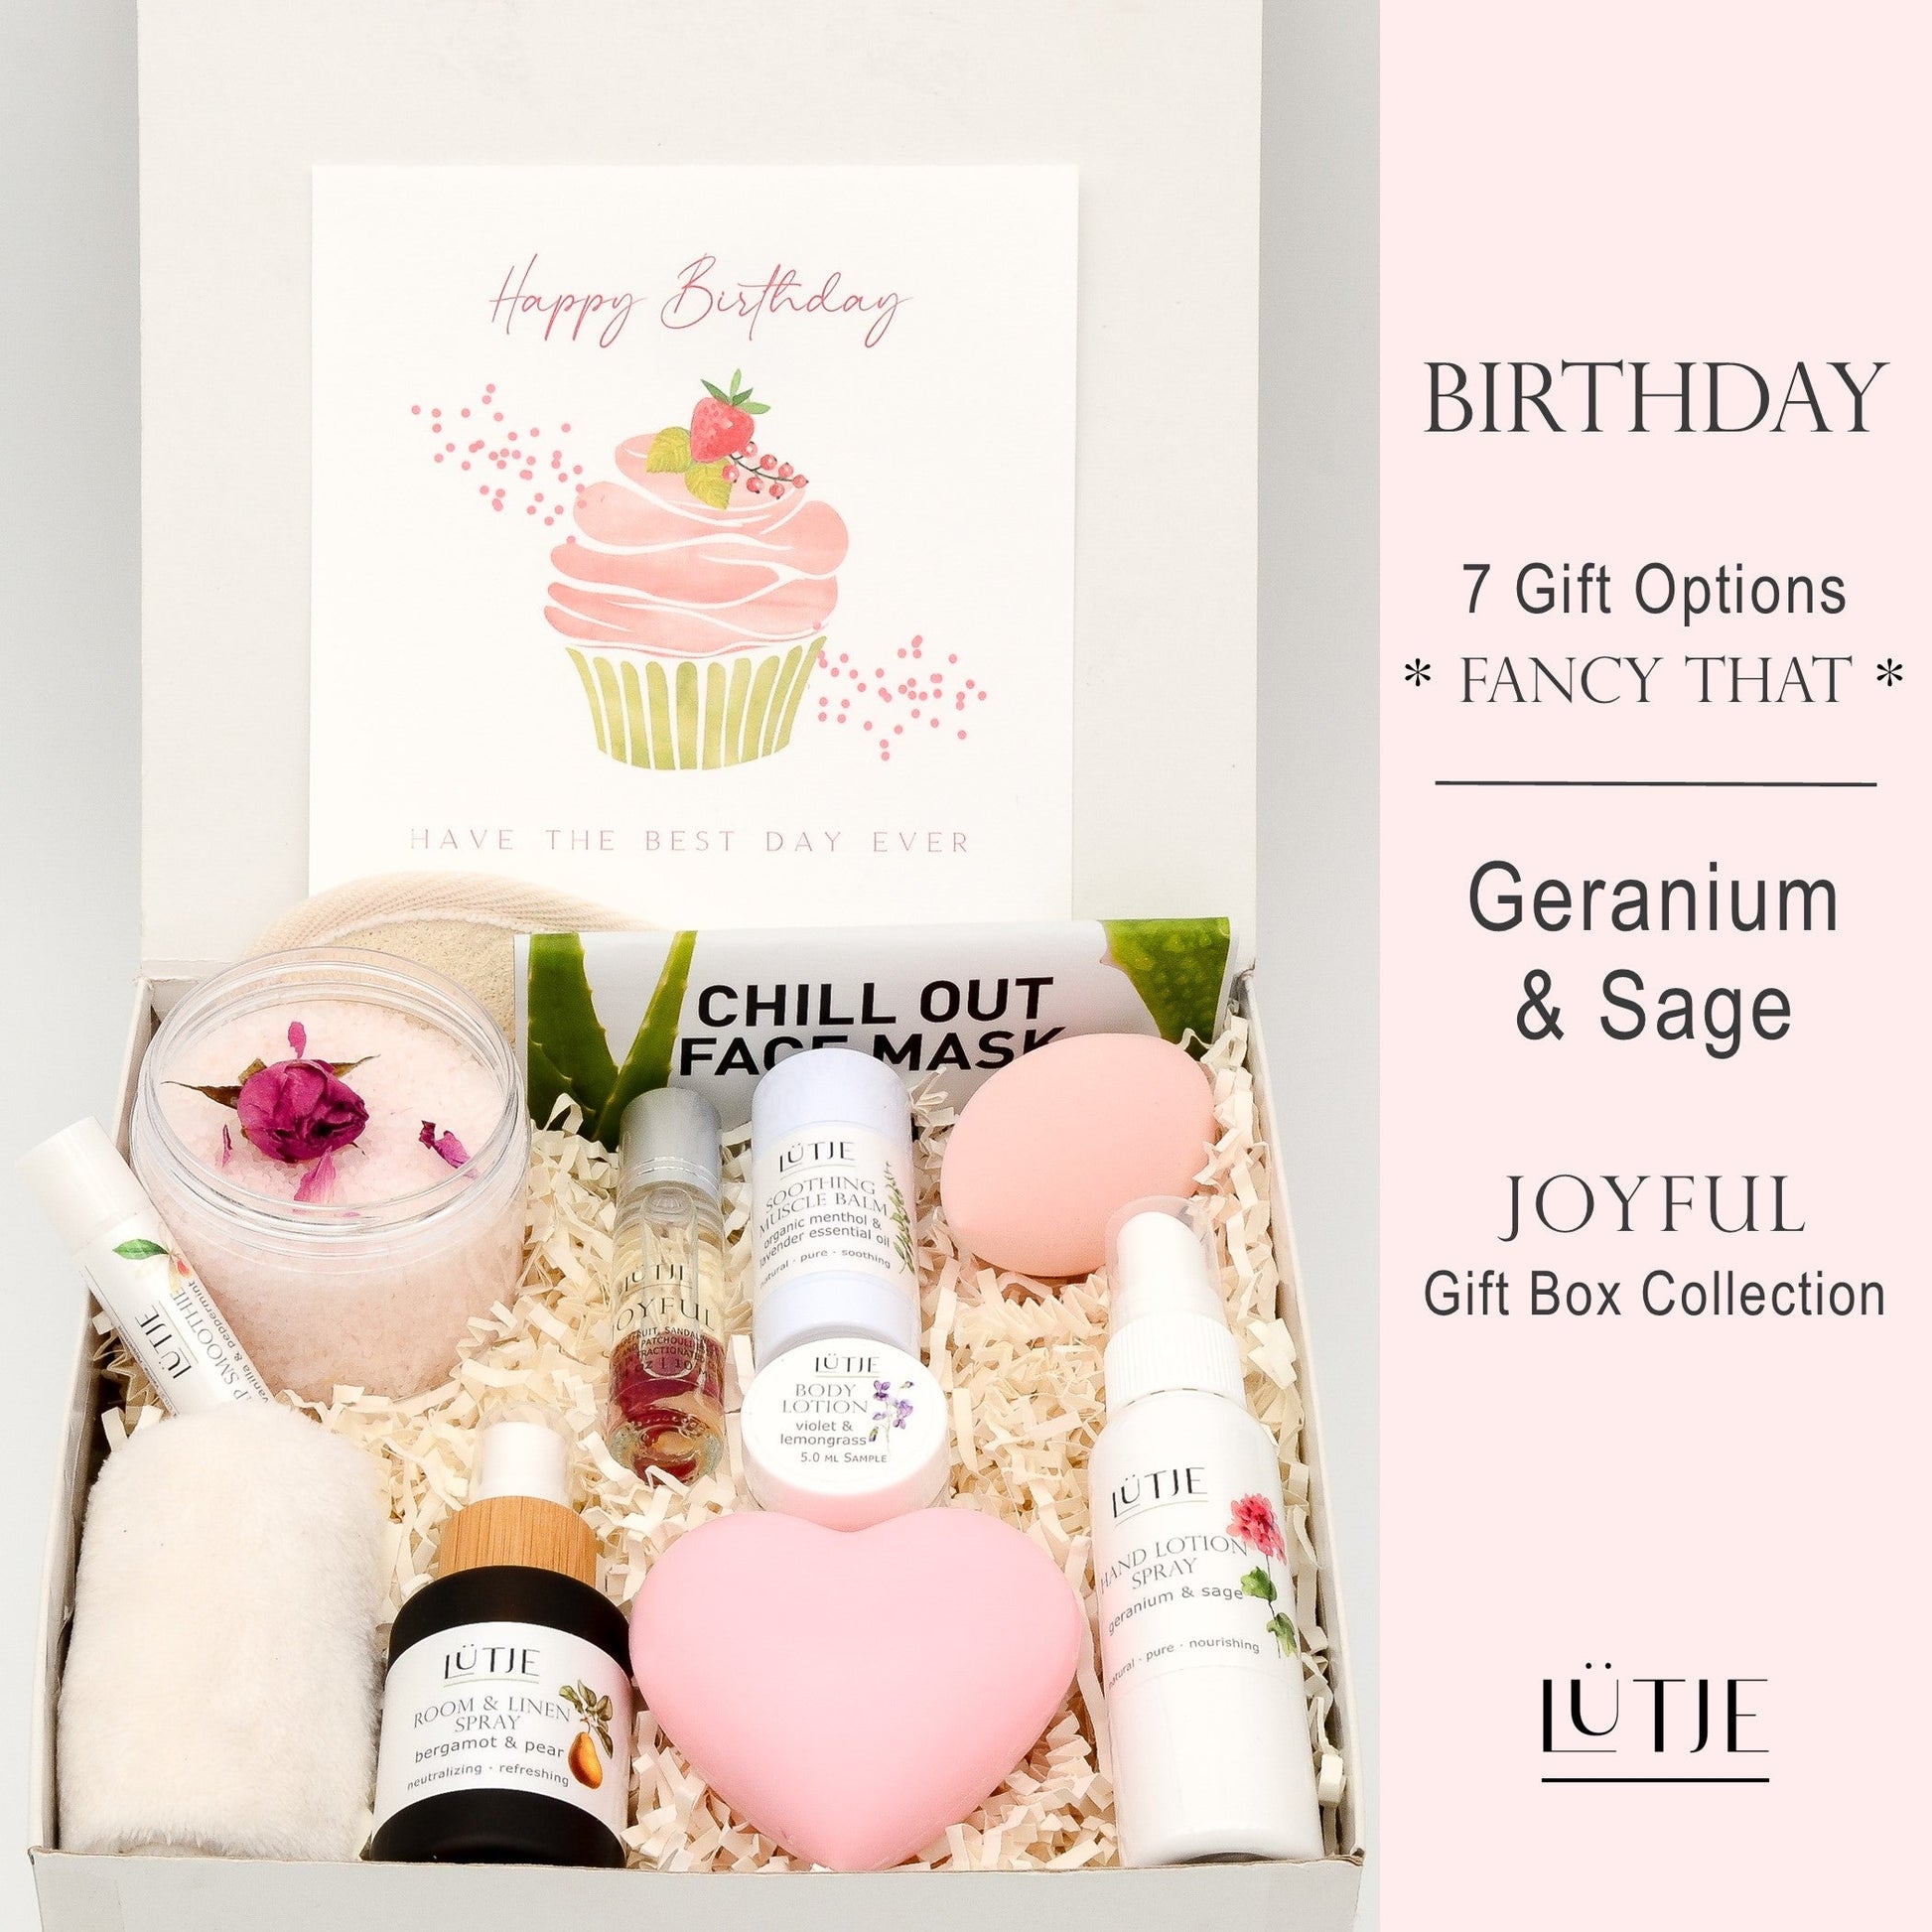 Gift Boxes for women, wife, daughter, BFF, sister, mom, or grandma, includes Geranium & Sage hand lotion spray and body lotion, essential oil, lip balm, soothing muscle balm, Bergamot & Pear room & linen spray, French soap, French bath salts, hydrating face mask, other bath, spa and self-care items, and 18K gold-plated necklace with engraved heart.